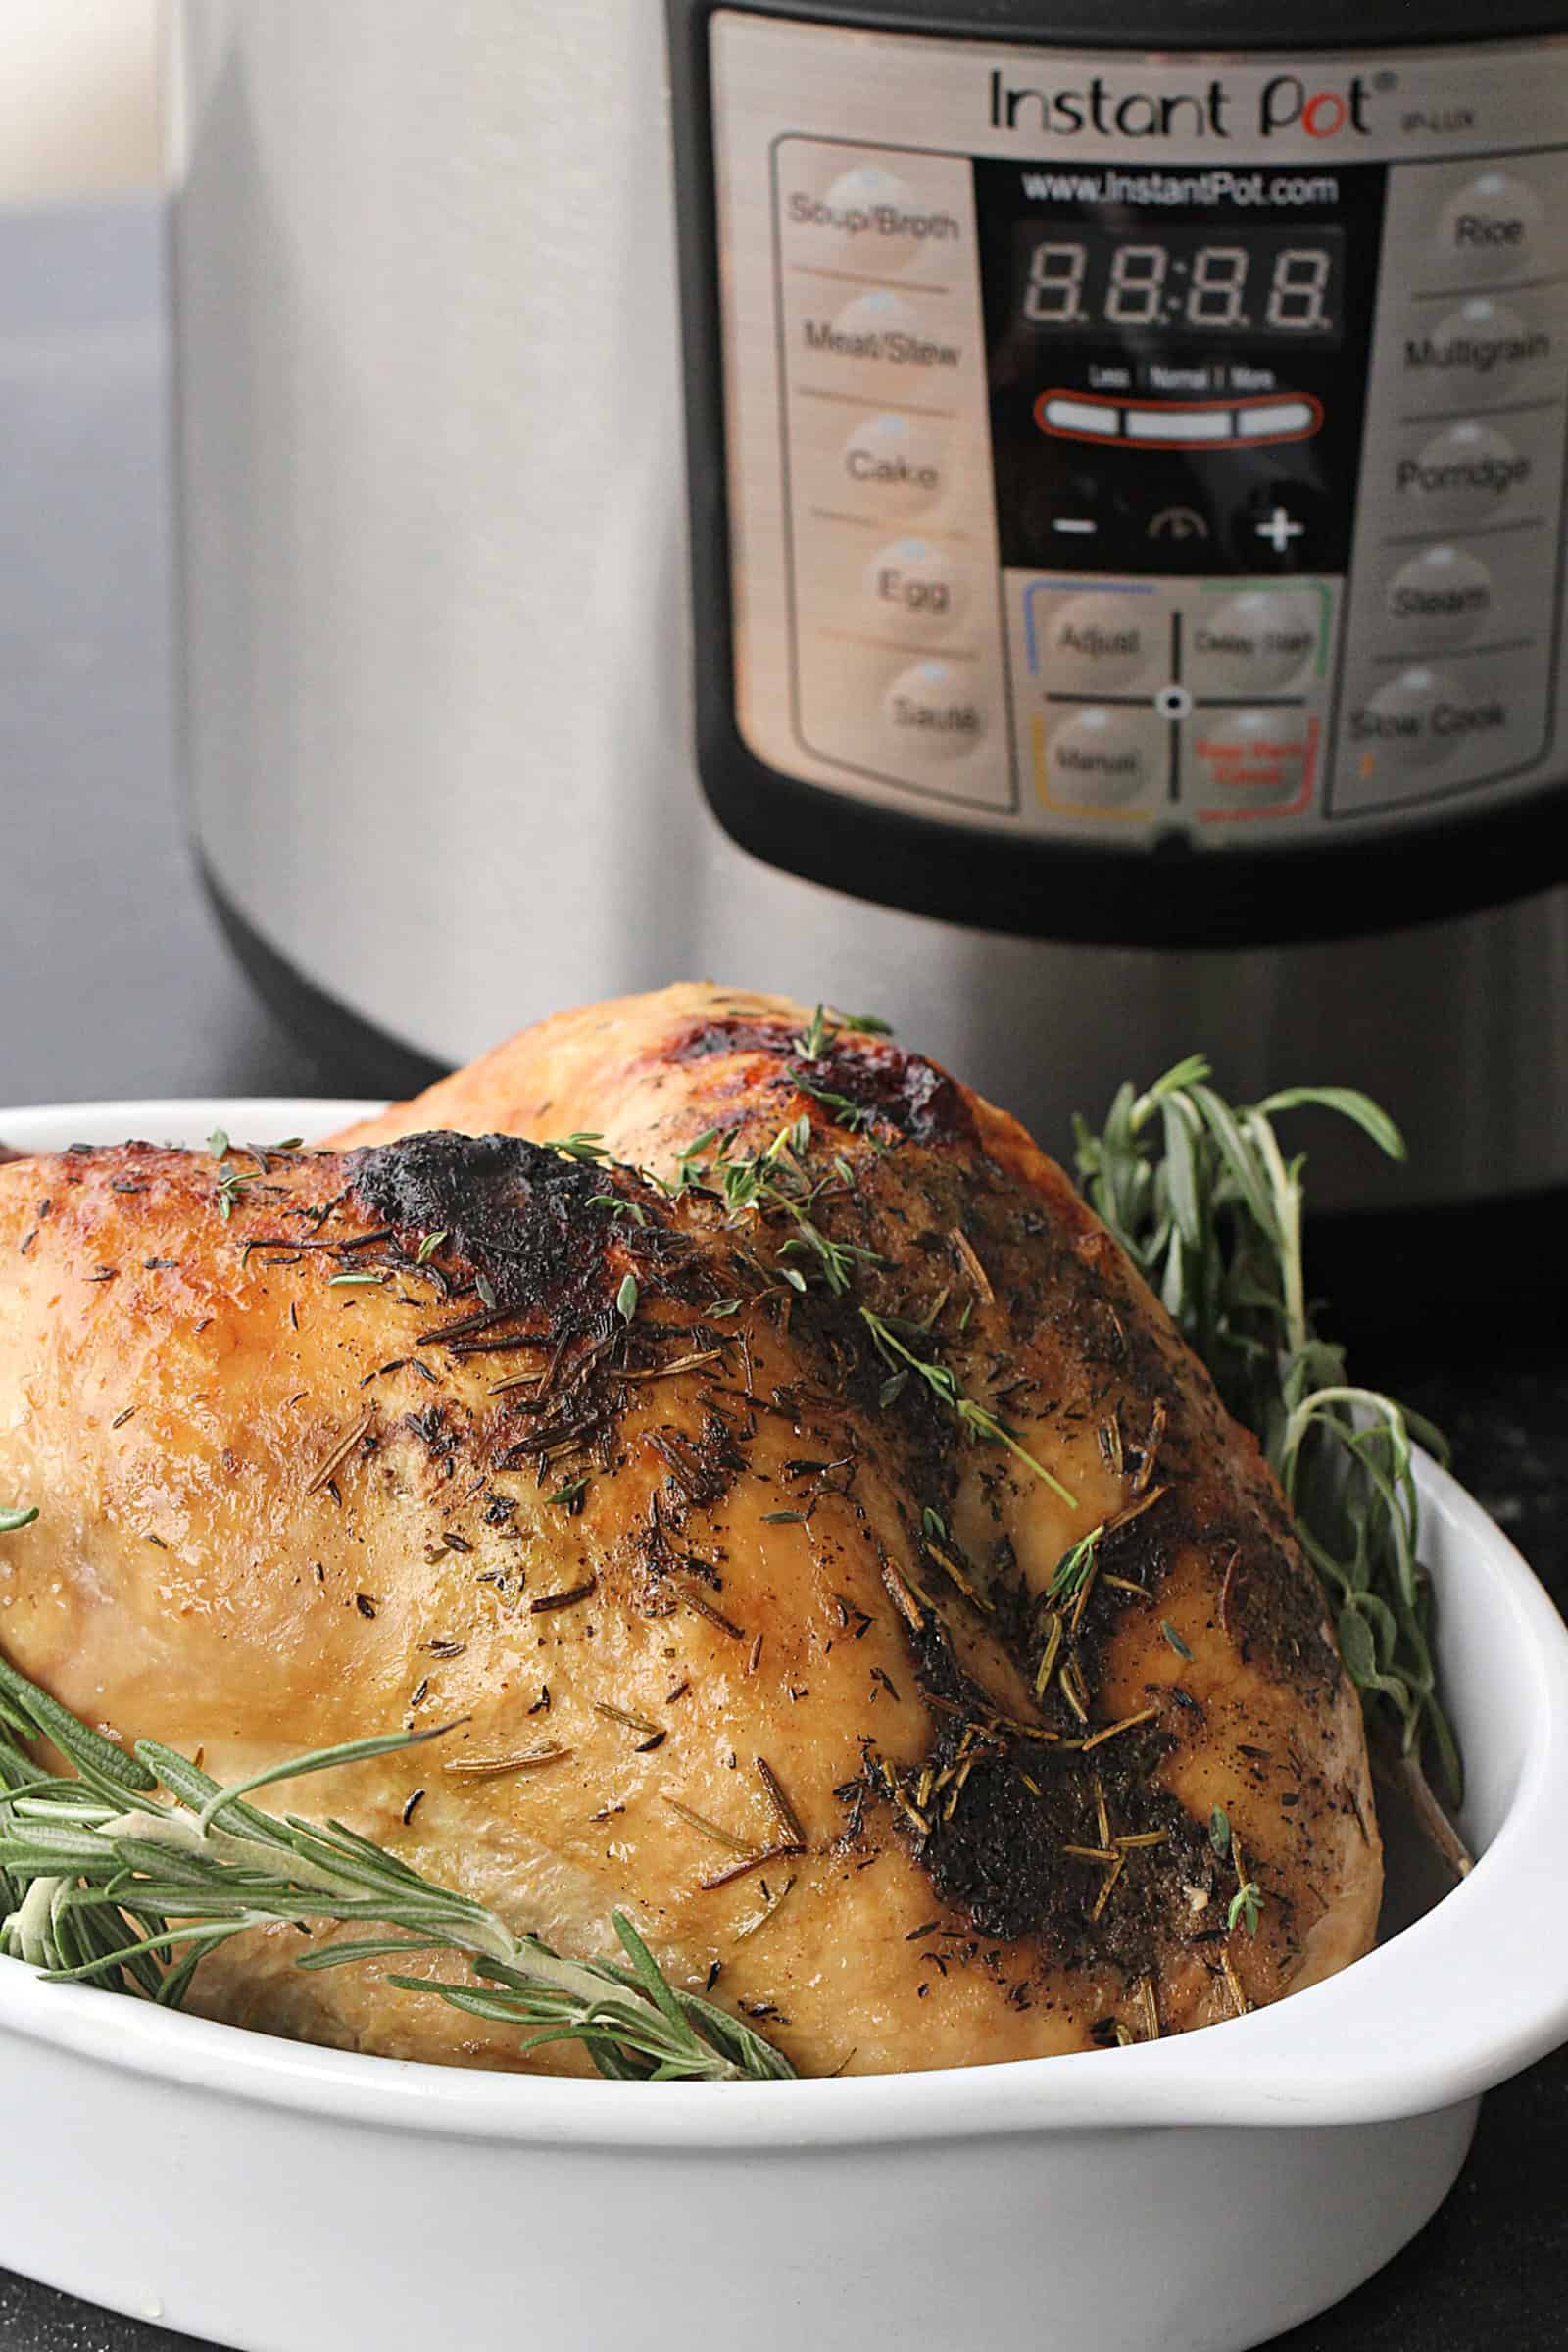 https://www.sixsistersstuff.com/wp-content/uploads/2020/11/how-to-cook-a-frozen-turkey-in-the-Instant-Pot-scaled.jpg